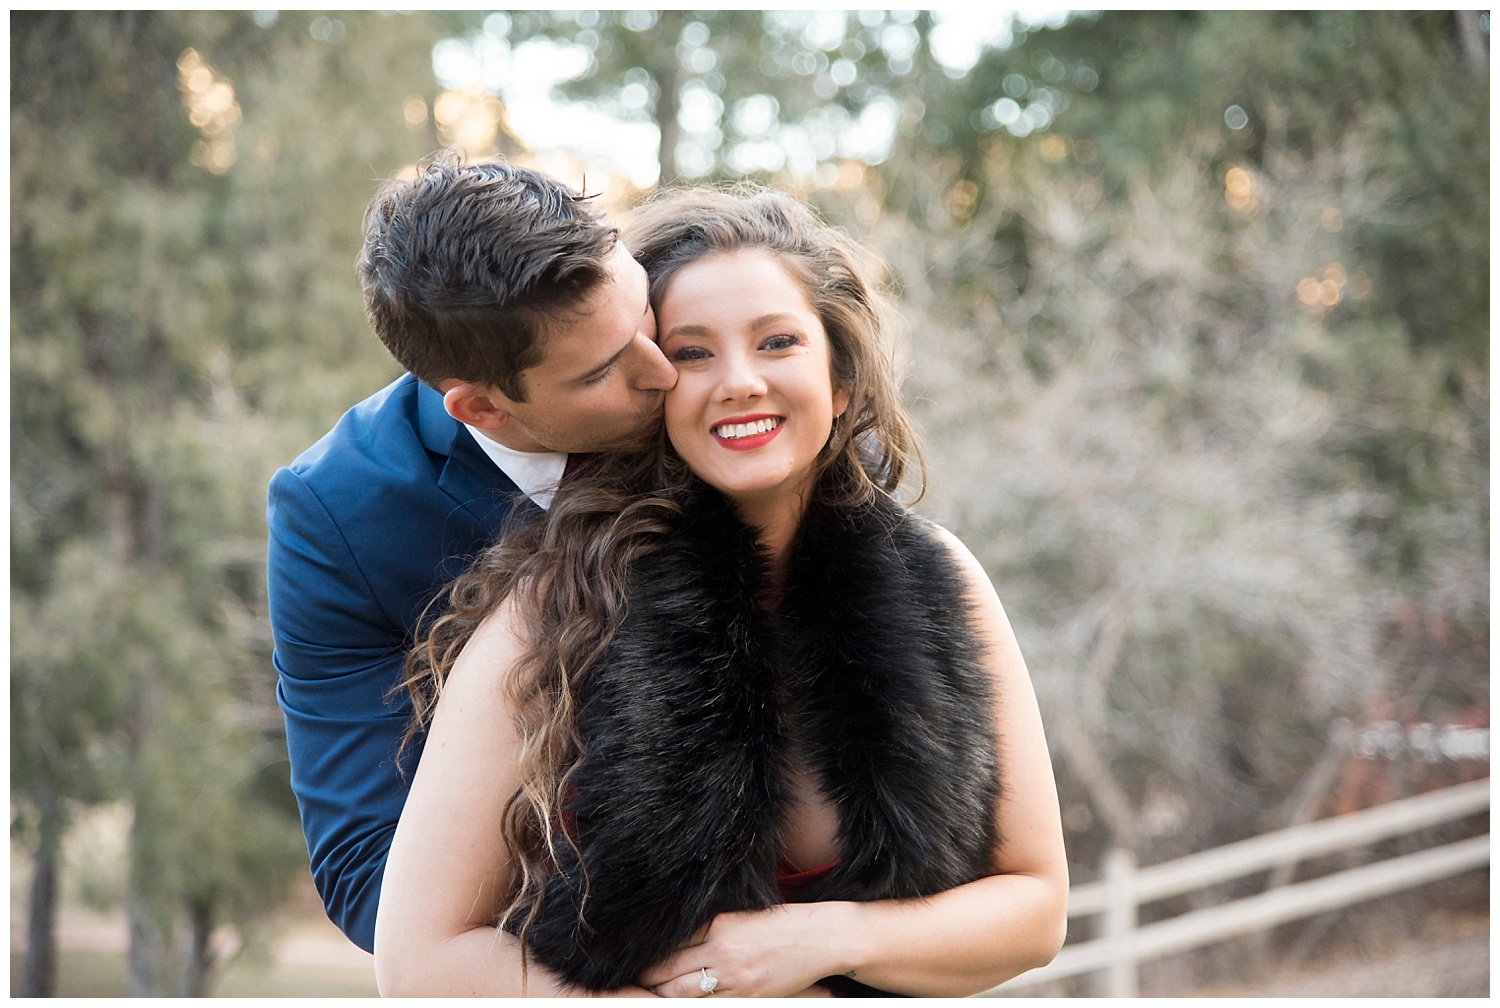 Man Hugging Woman From Behind | Nicholas and Eden's Surprise Proposal at Glen Eyrie Castle | Colorado Springs Photographer | Farm Wedding Photographer | Apollo Fields Wedding Photojournalism